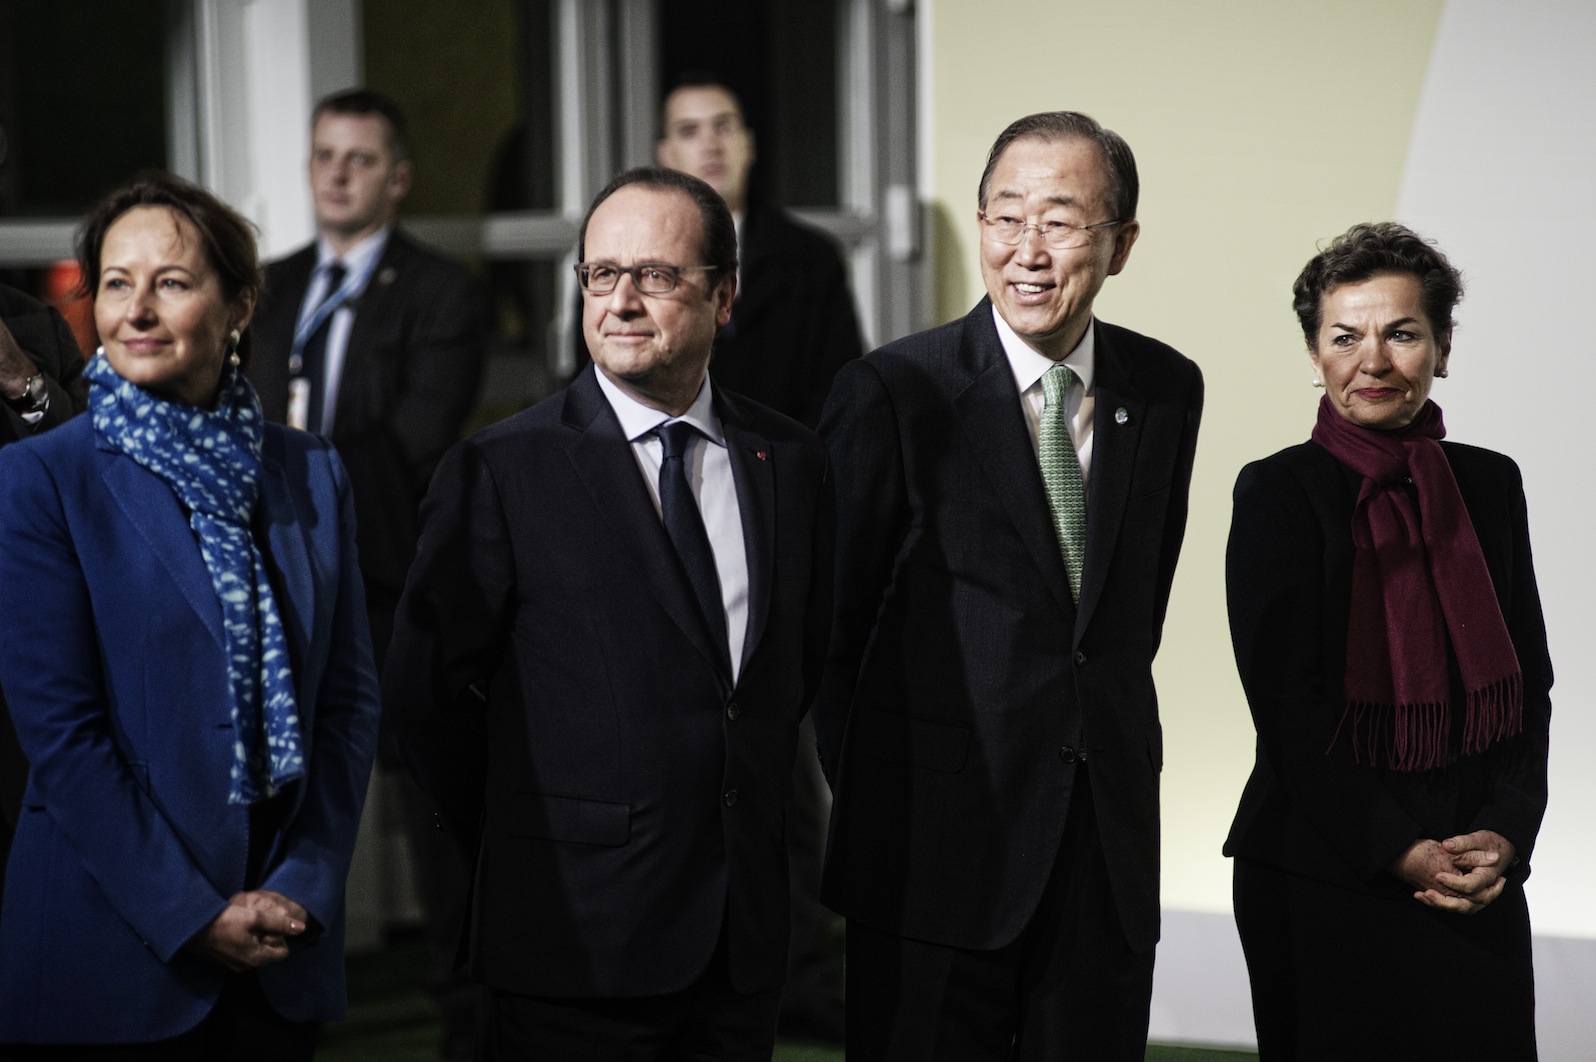 The COP21 is officially open